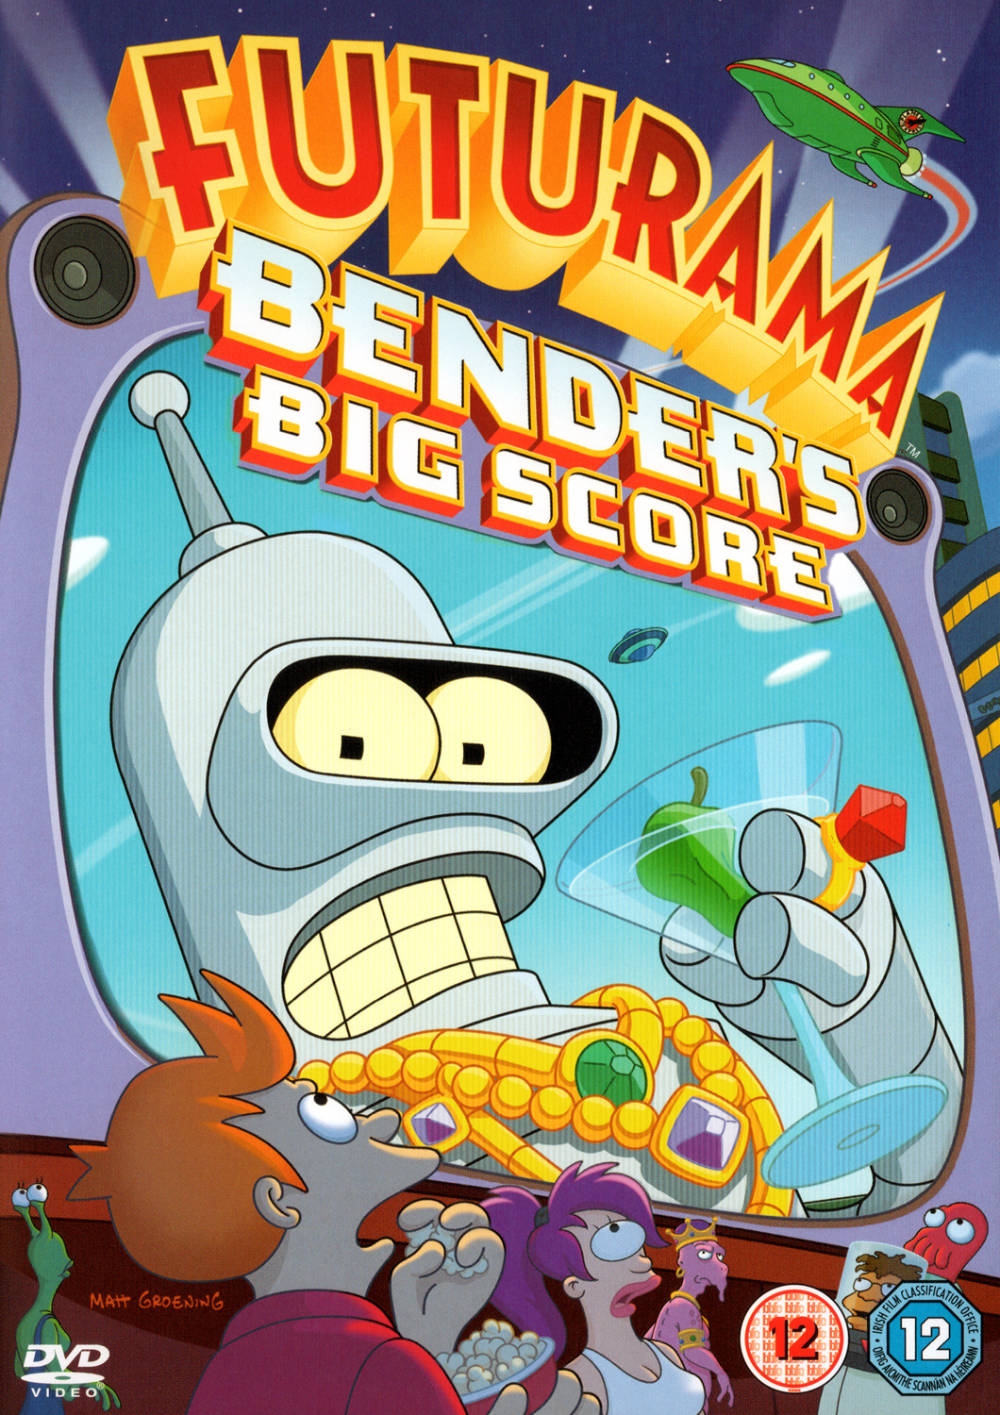 You are currently viewing Futurama: Bender’s Big Score